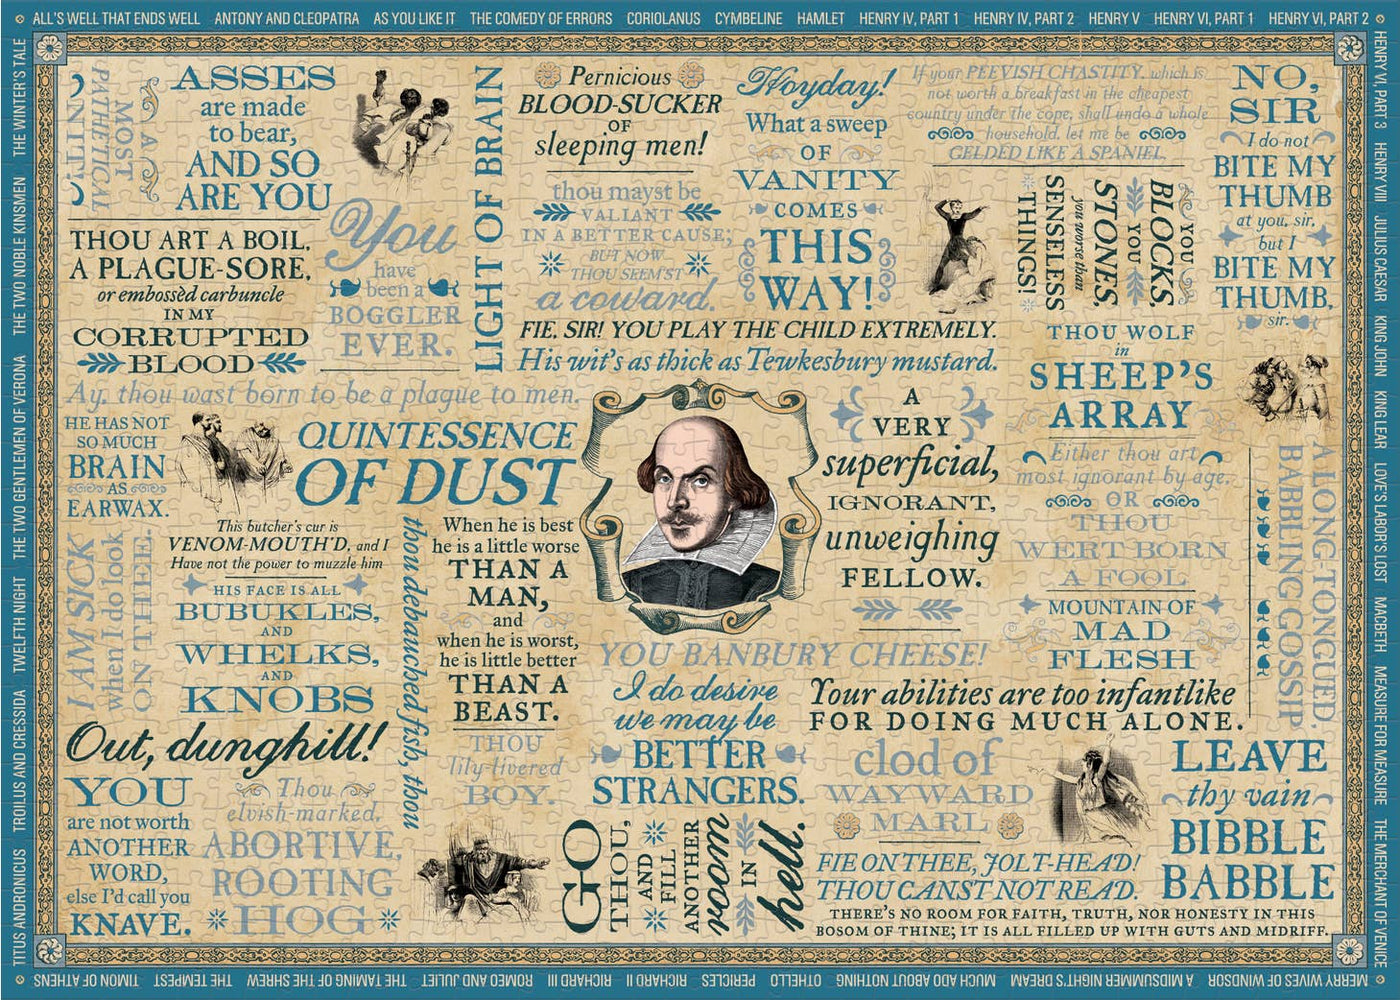 Shakespearean Insults | 1,000 Piece Jigsaw Puzzle